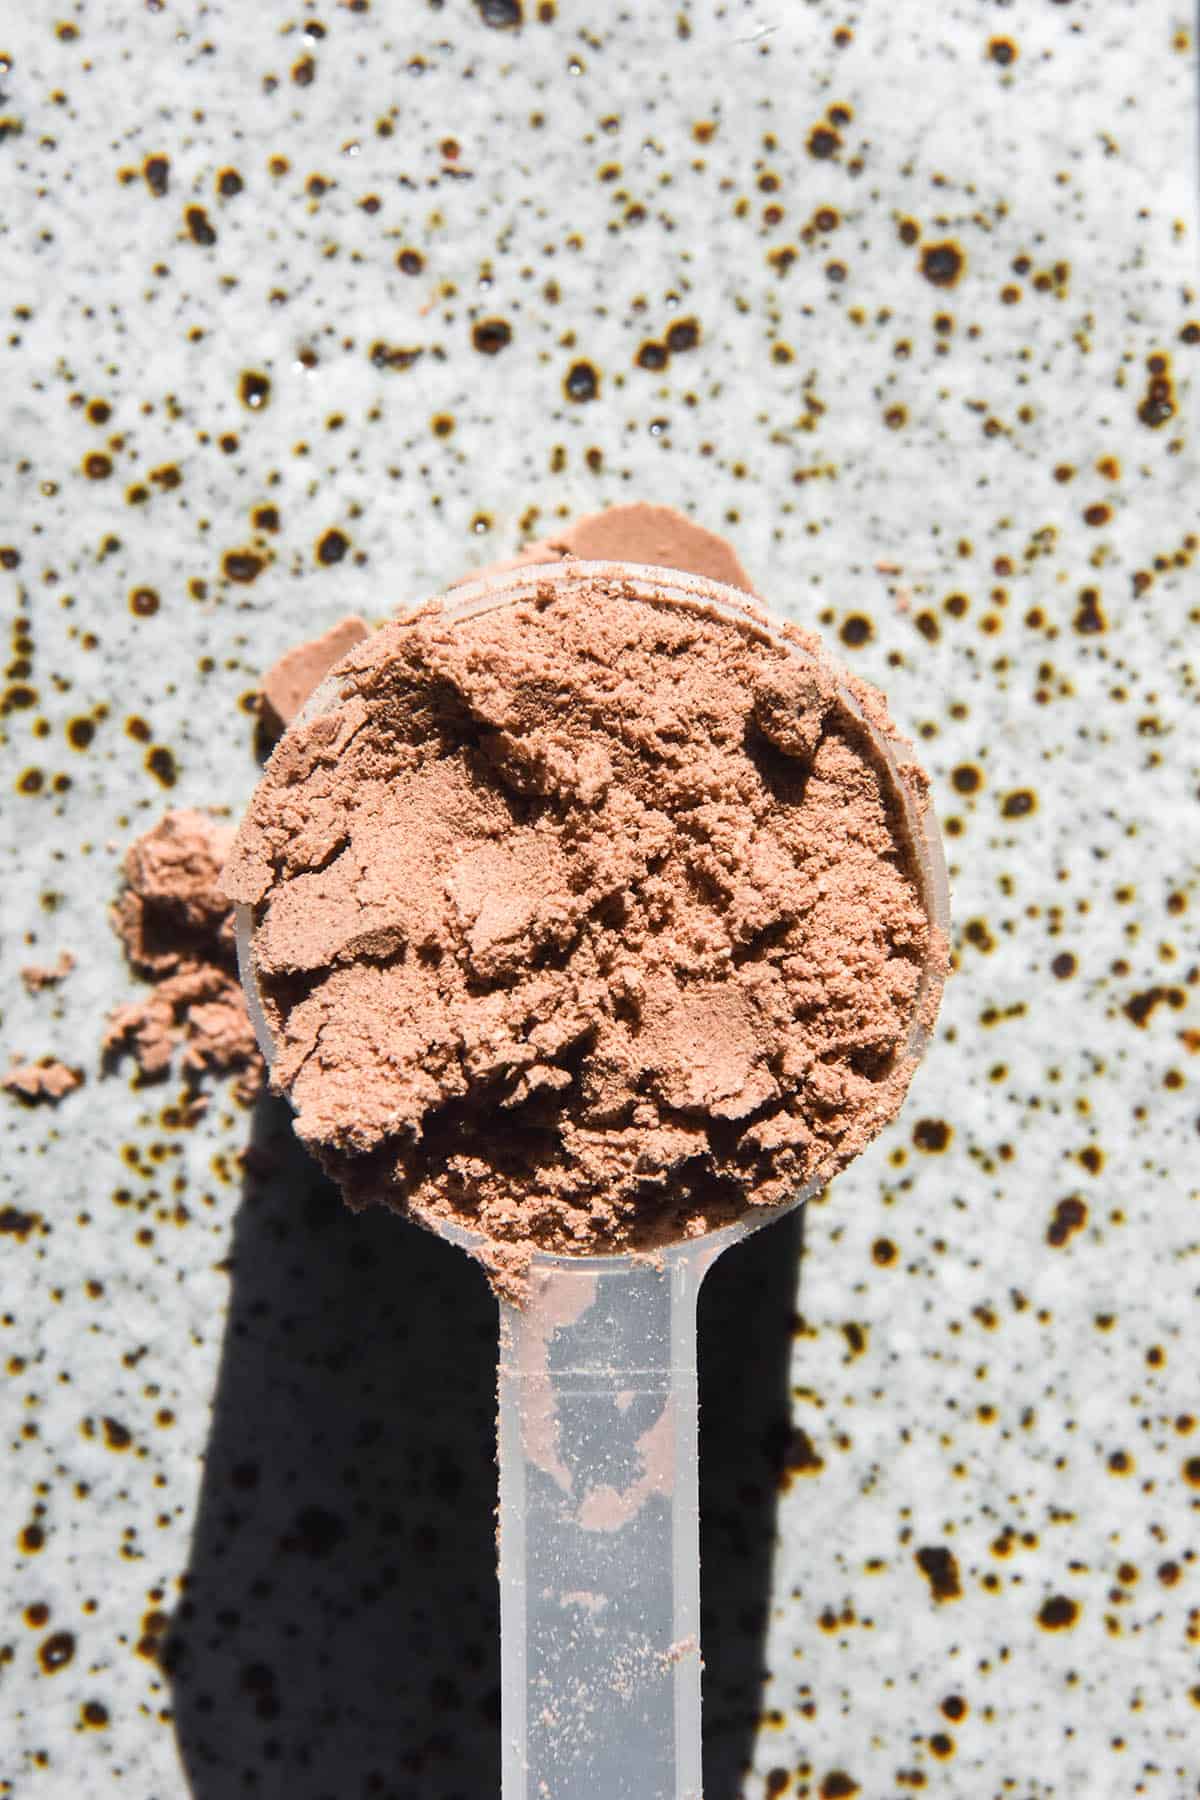 A close up aerial image of a scoop of  chocolate protein powder on a white speckled ceramic plate